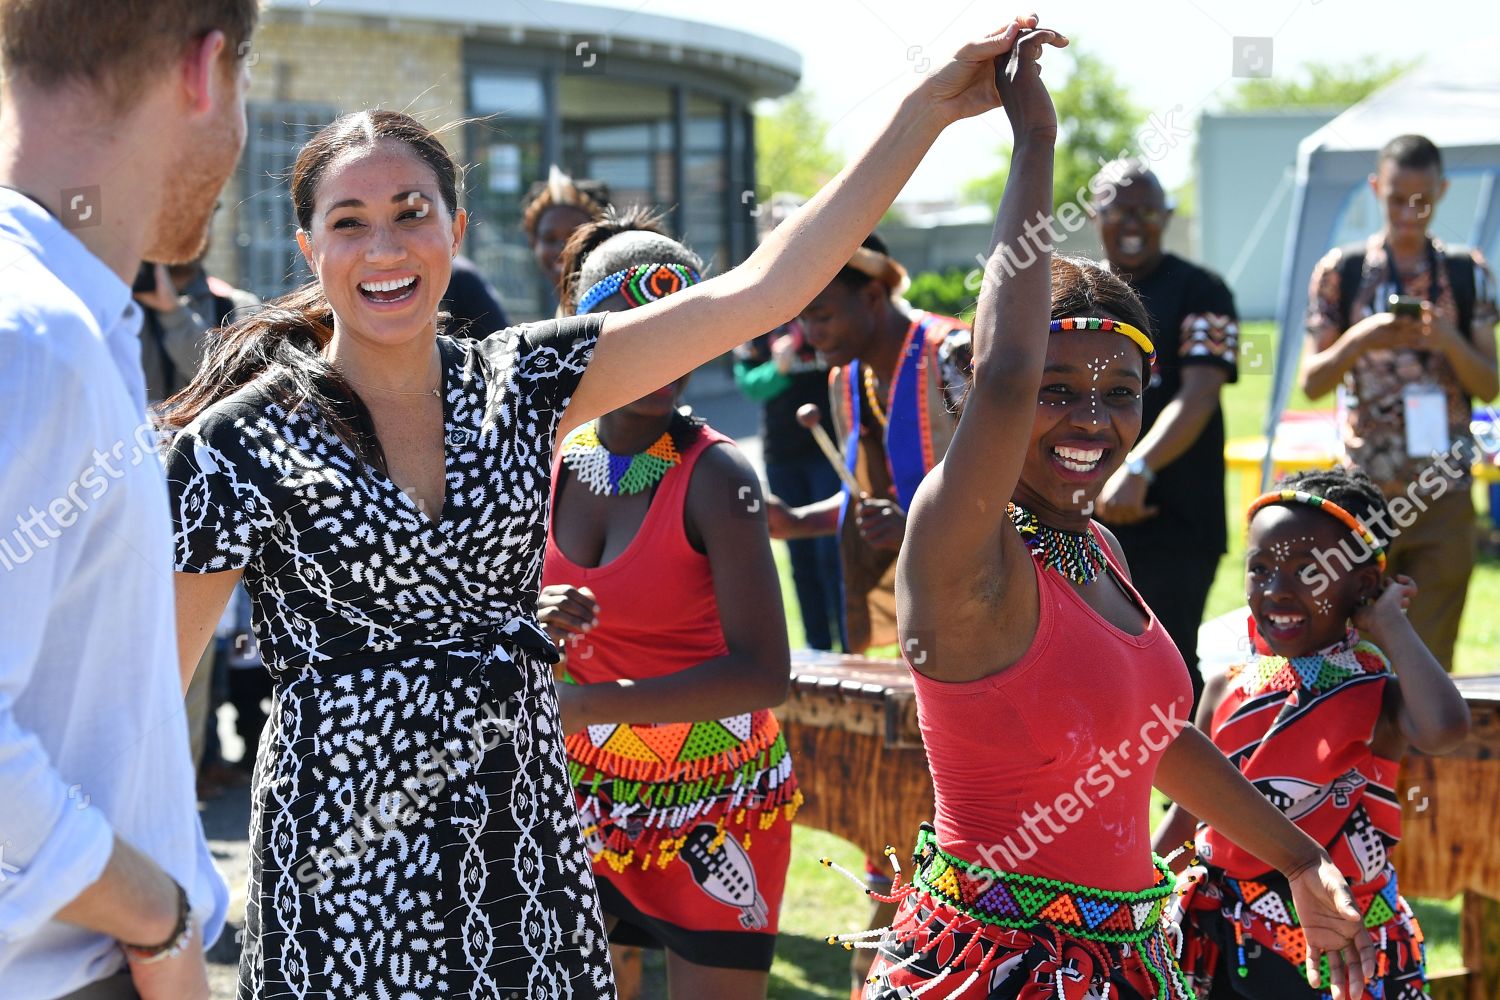 prince-harry-and-meghan-duchess-of-sussex-visit-to-africa-shutterstock-editorial-10421470bc.jpg